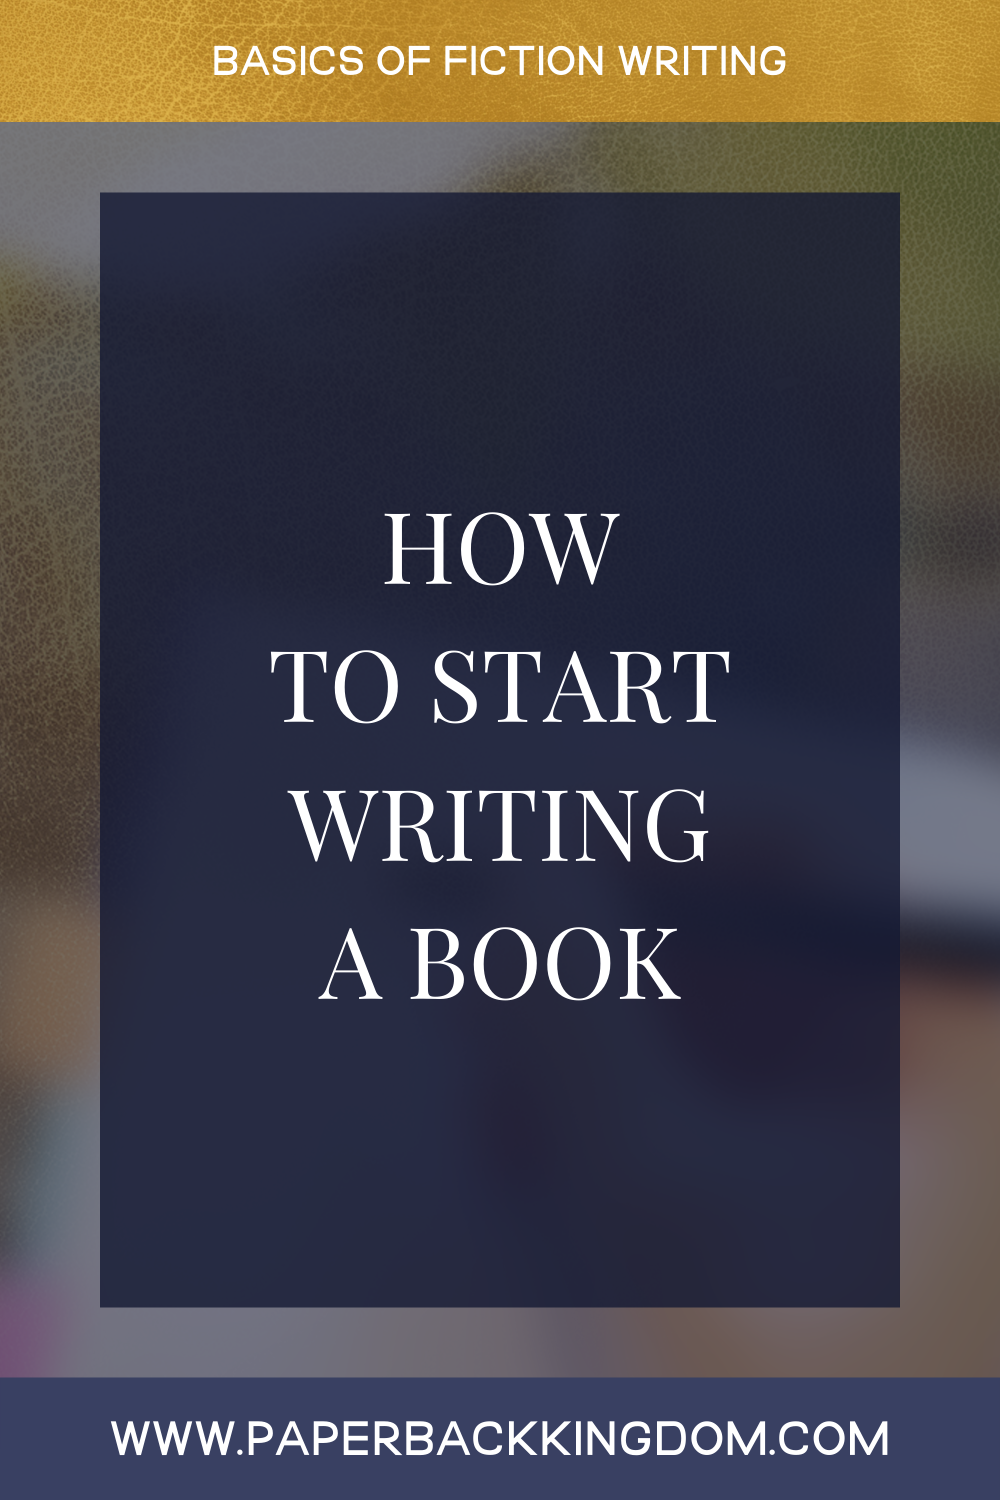 How To Start Writing A Book - Whether this is your very first book and you’re overwhelmed with doubts and fear, or you’re feeling the pressure to write a stunning sequel… or this a new book idea that’s hit you out of nowhere and left you feeling lost and confused, know this: starting your book gets to be EASY. And today, I’m going to walk you through a process that will ignite your creativity and get the process moving FAST.